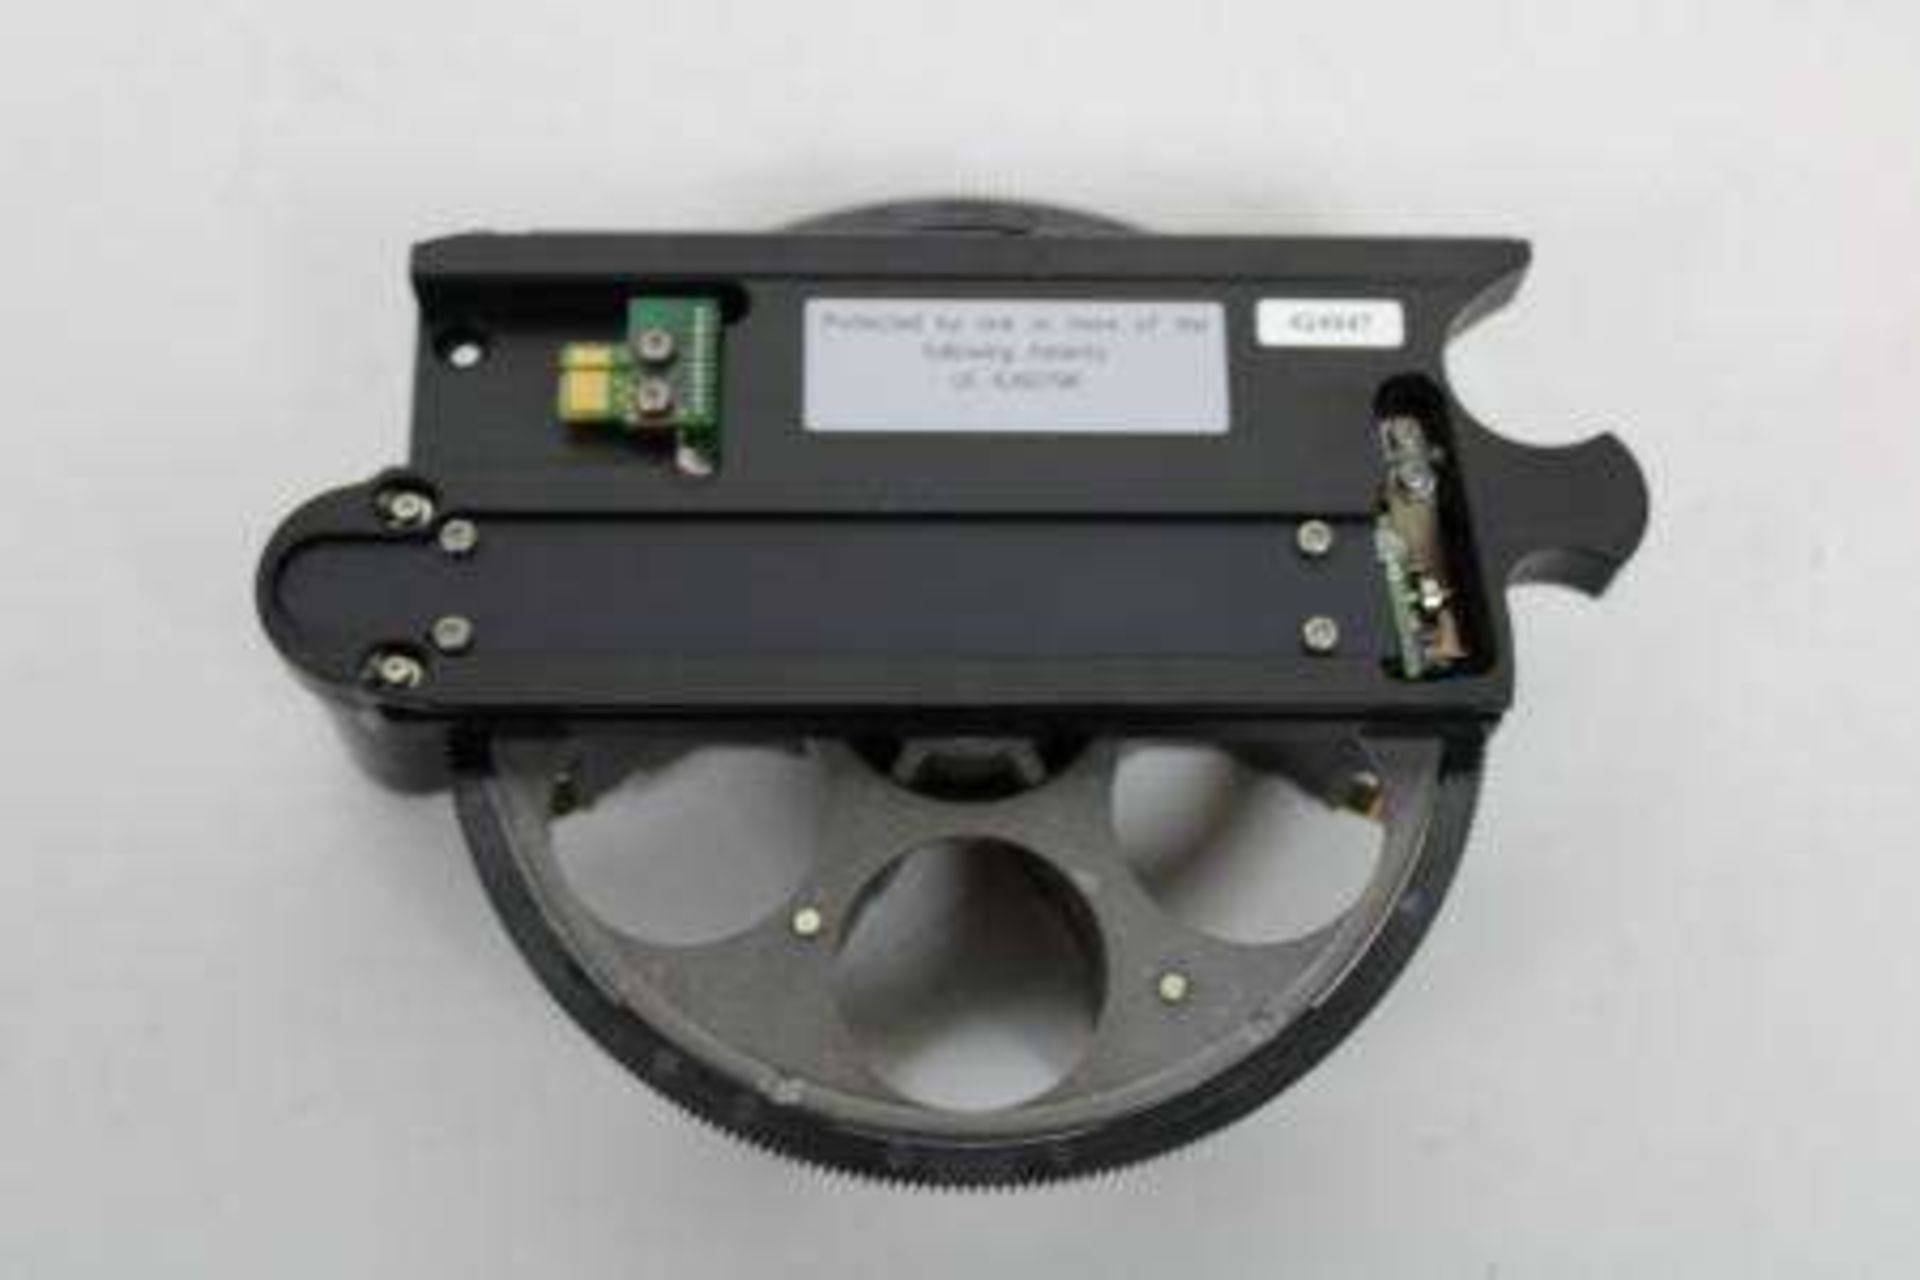 Carl Zeiss AXIO Observer.Z1 - Image 19 of 20